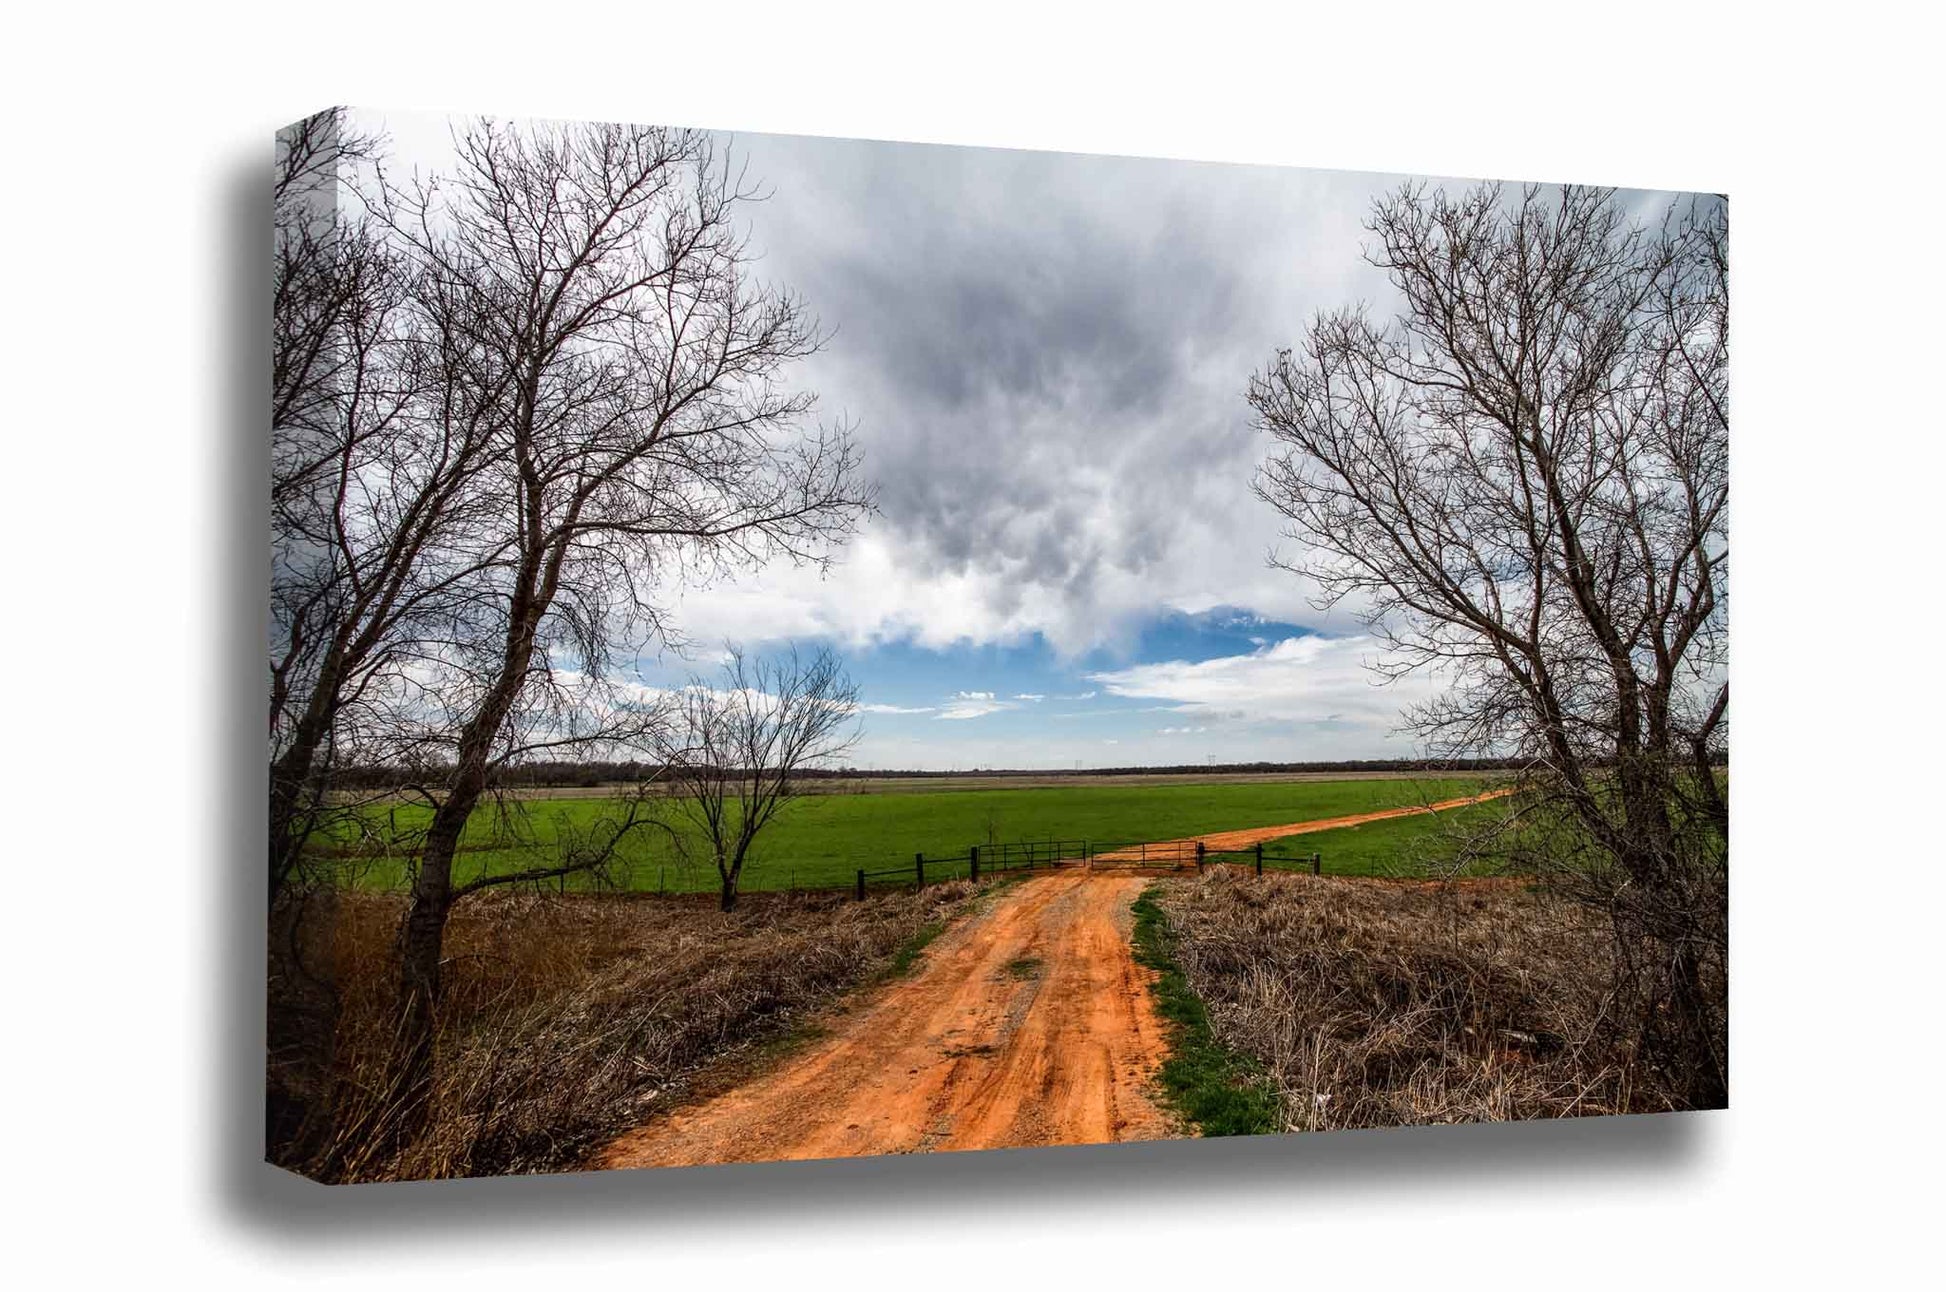 Country canvas wall art of a dirt road between trees leading to a field and to memories of times in rural Oklahoma by Sean Ramsey of Southern Plains Photography.